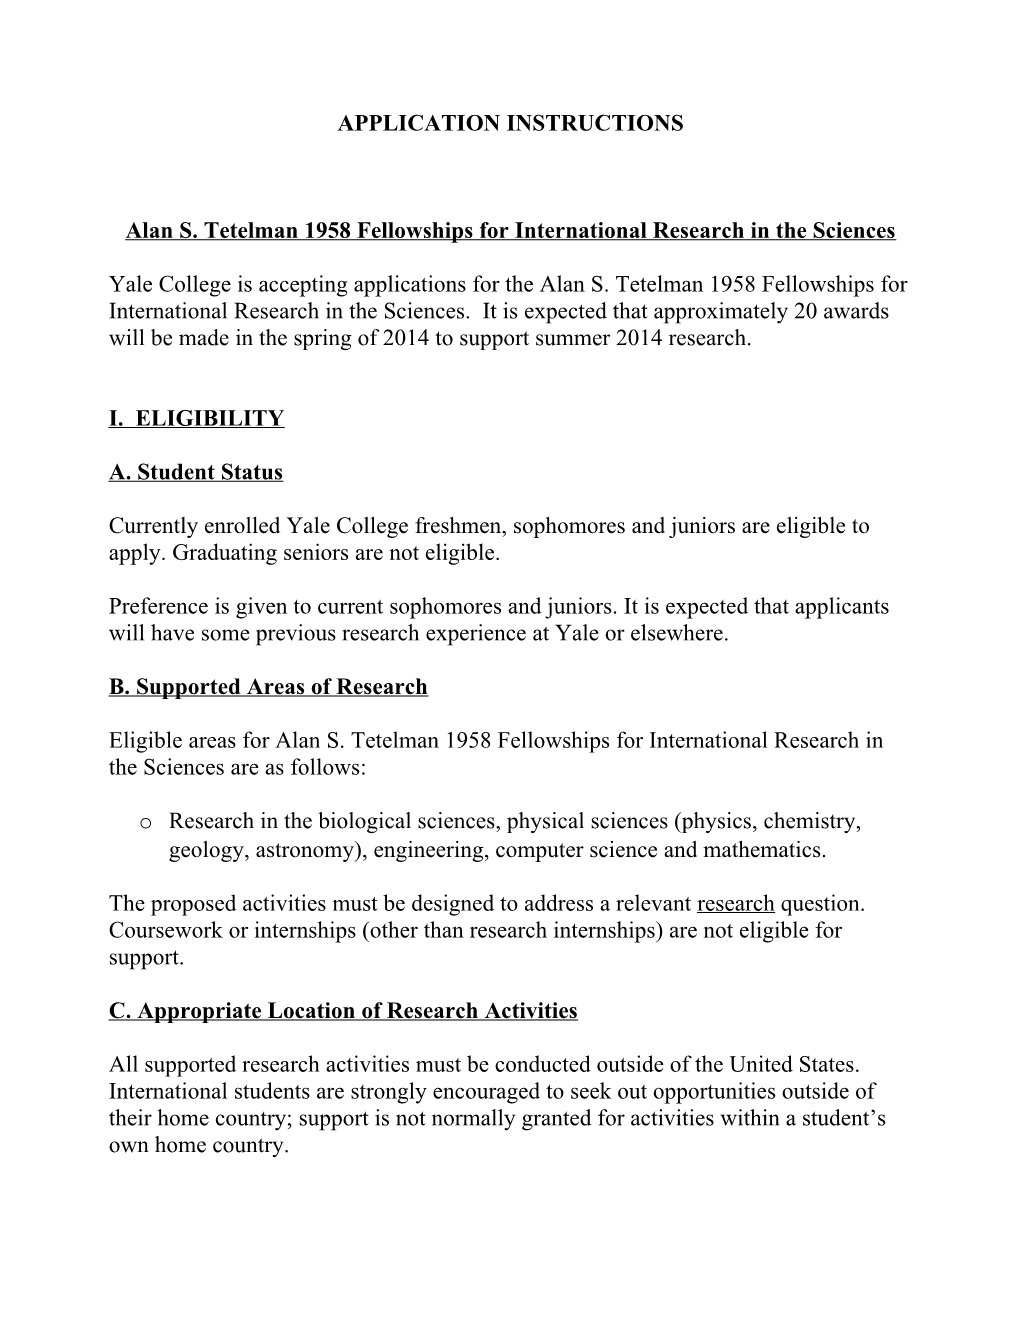 Alan S. Tetelman 1958 Fellowships for International Research in the Sciences